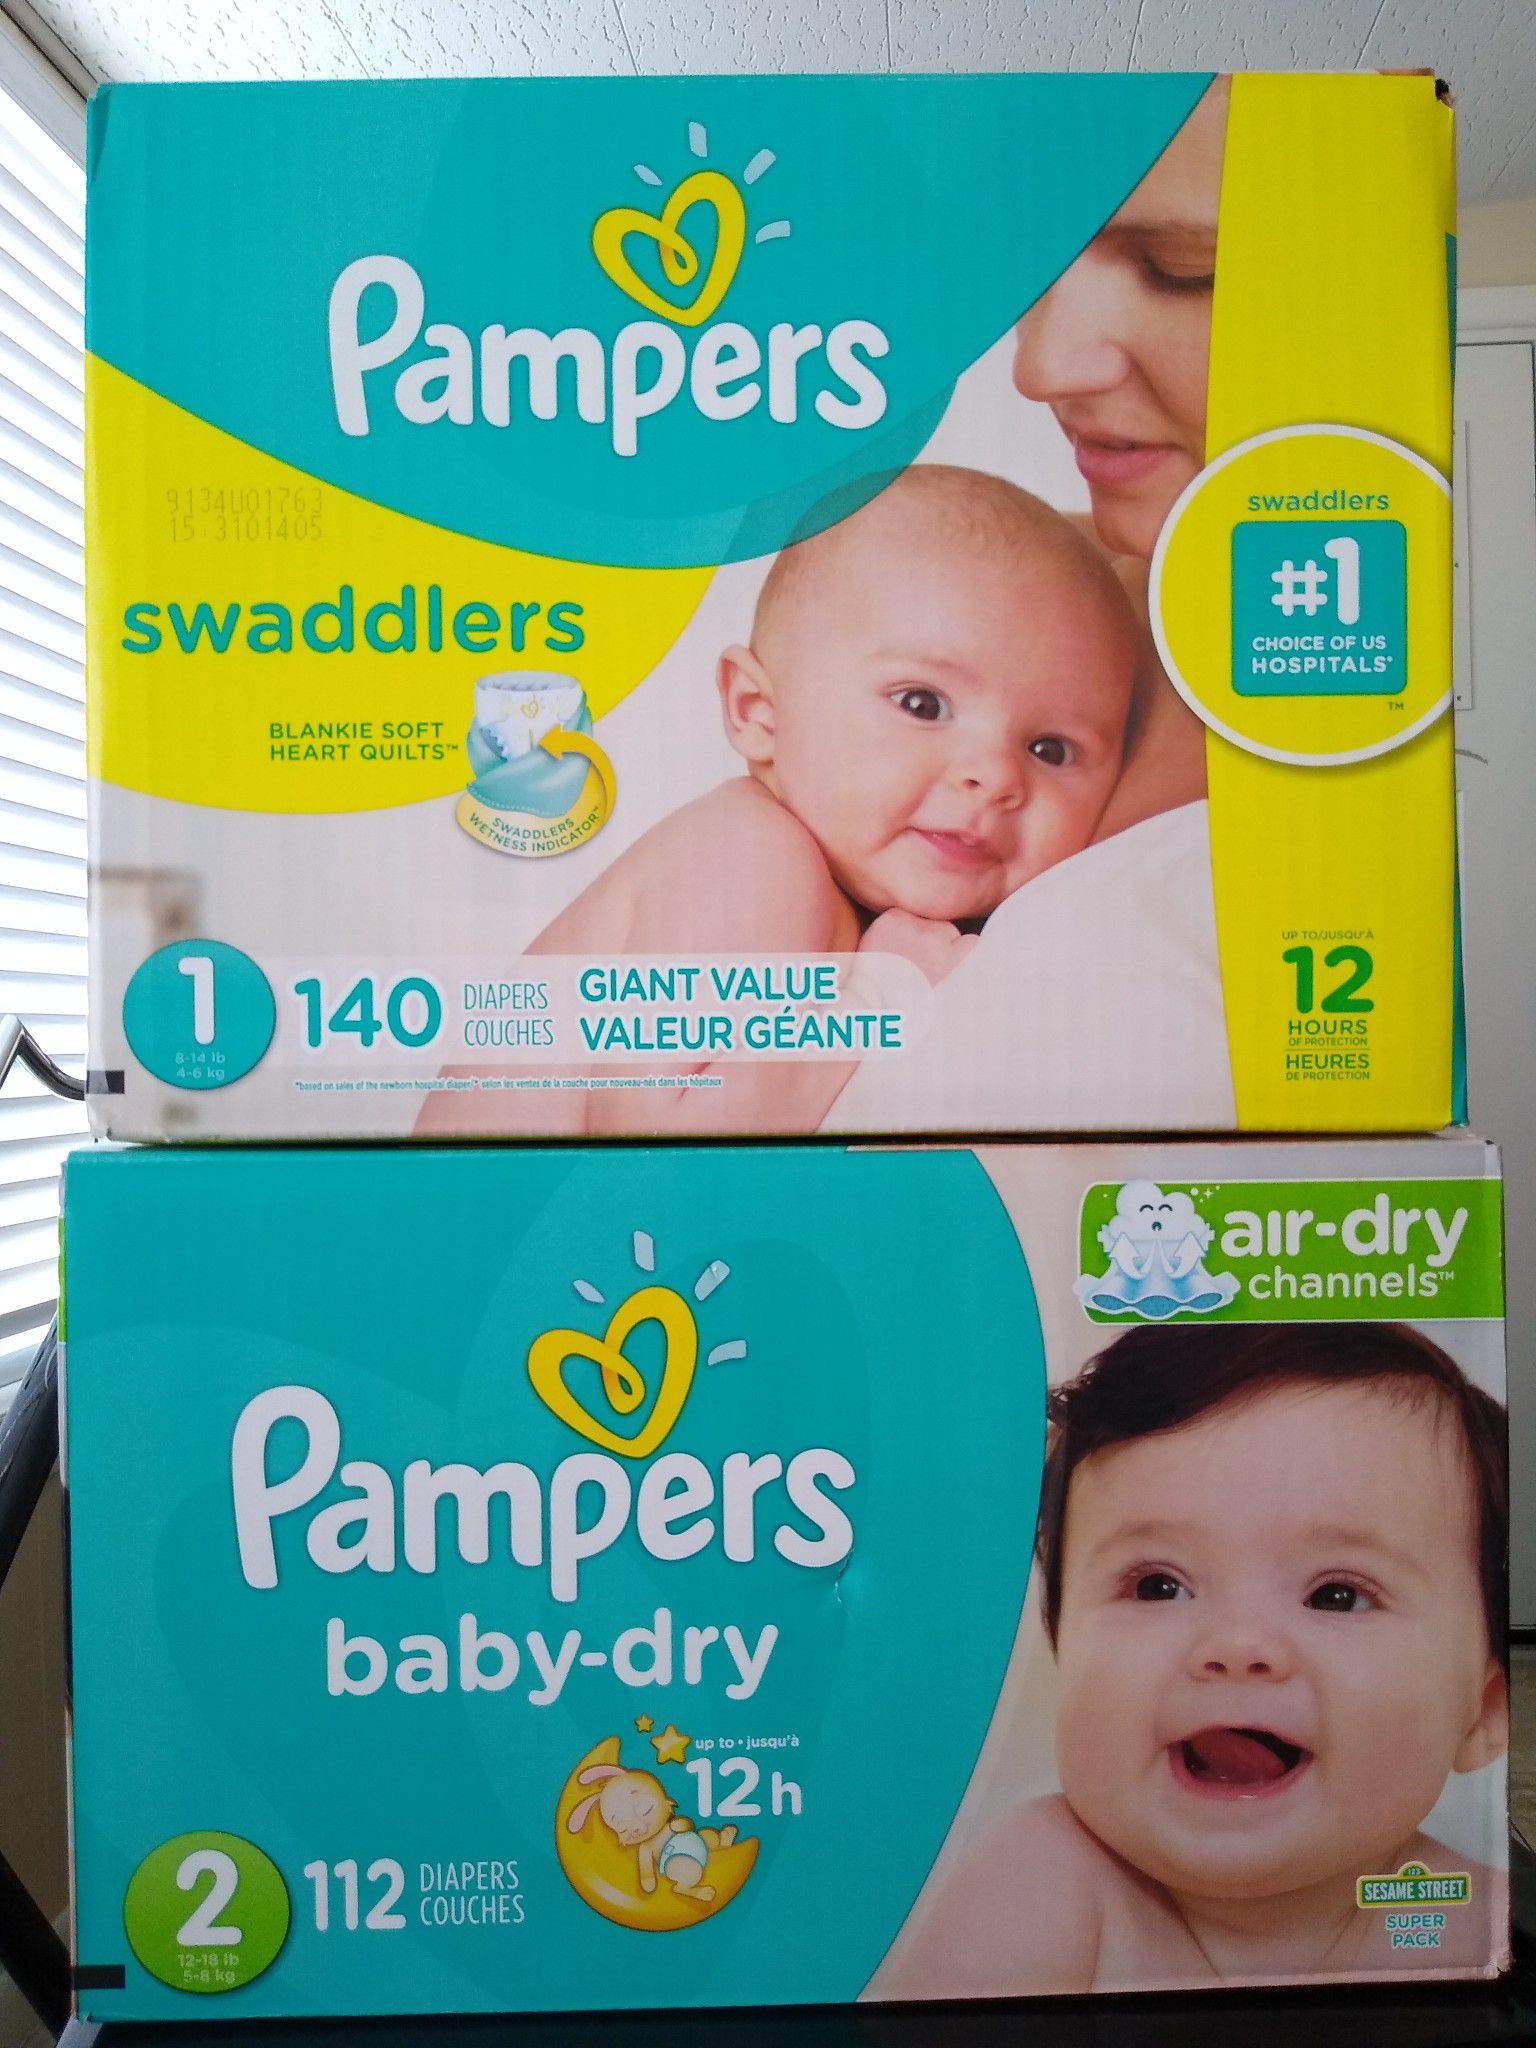 Pampers sizes 1 and 2